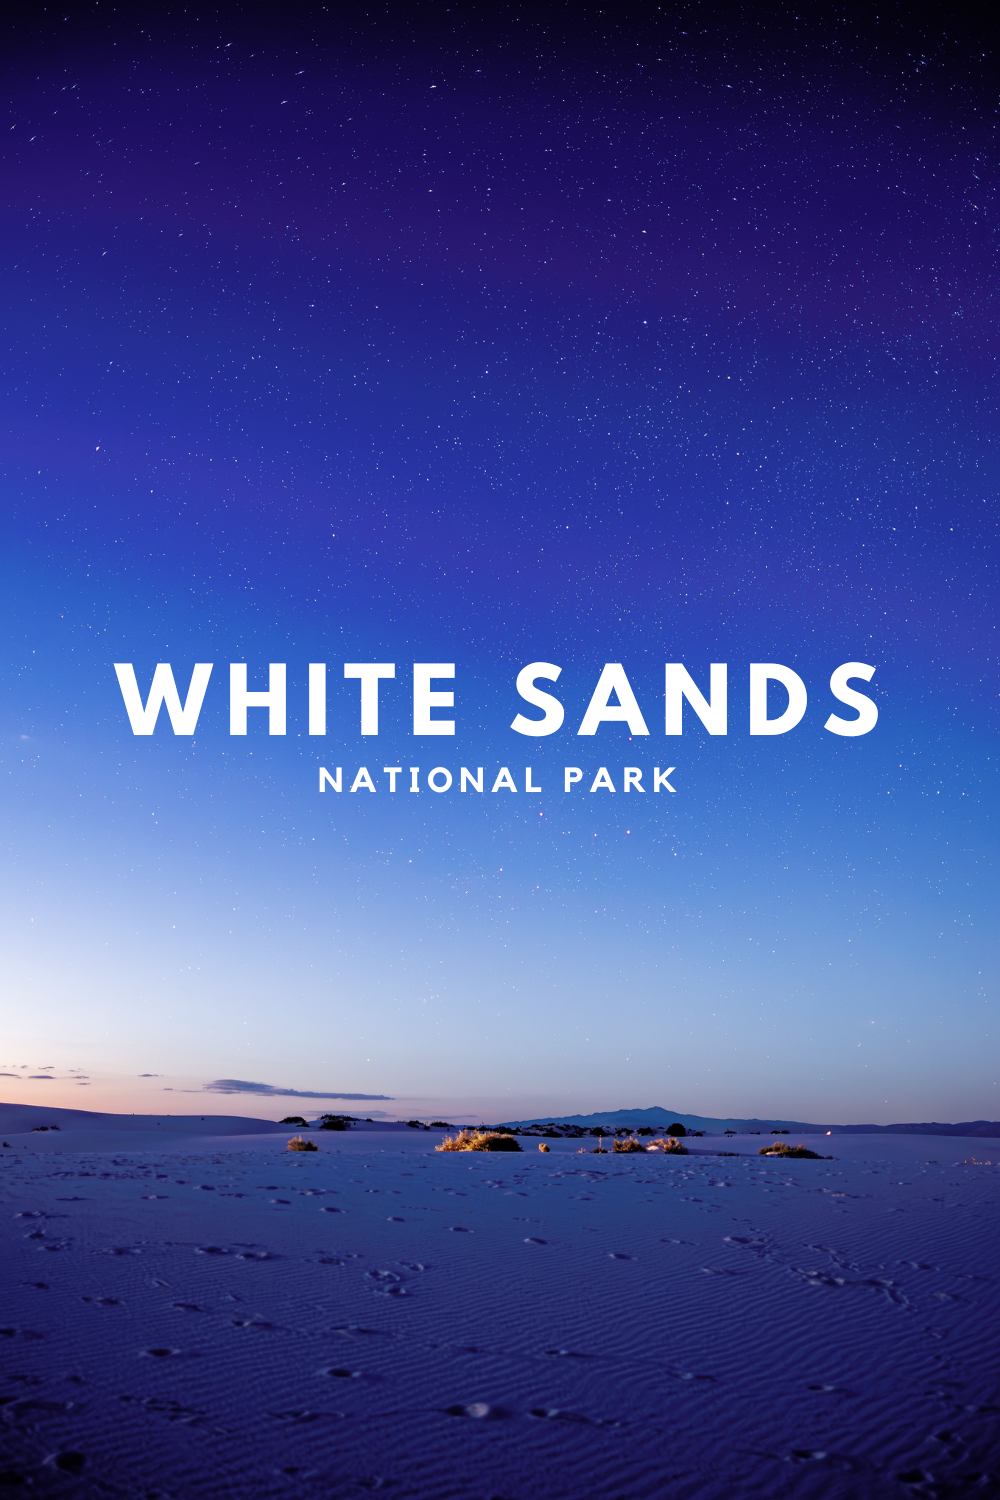 White Sands National Park | Nature + Nomad - Everything you need to know about visiting White Sands National Park in Alamogordo, New Mexico.